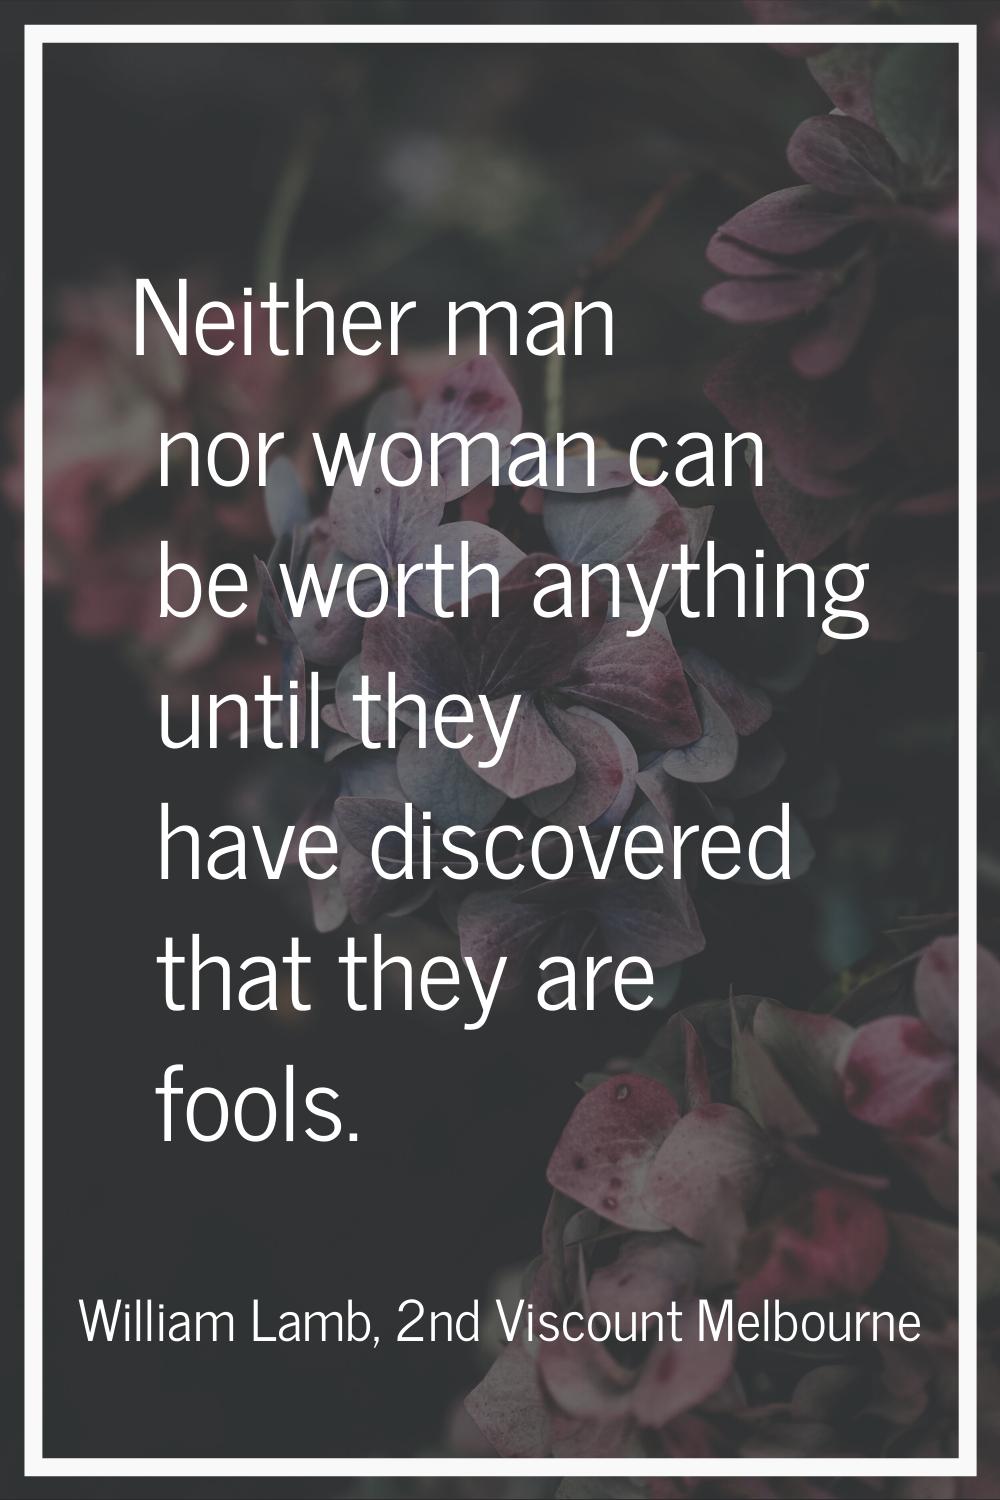 Neither man nor woman can be worth anything until they have discovered that they are fools.